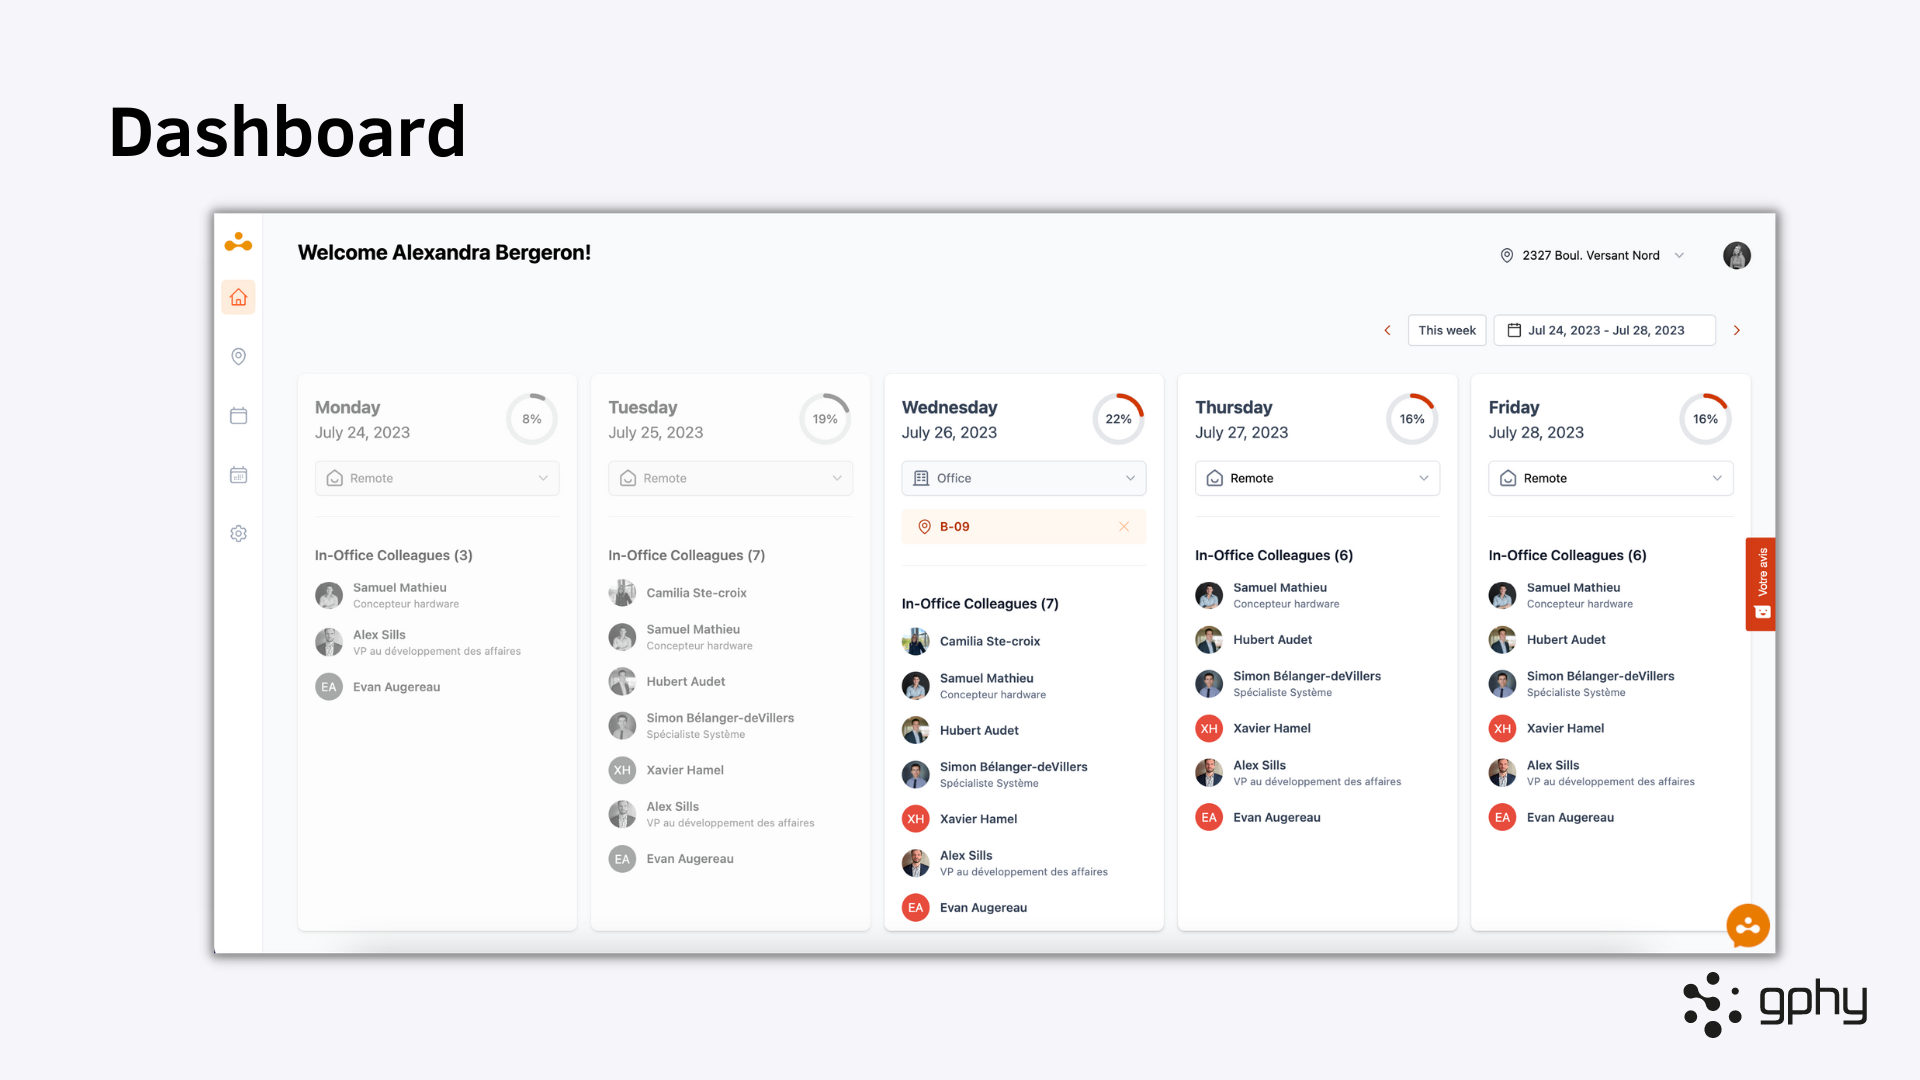 The elia dashboard allows employees to easily determine the best moment for them to go into the office based on their schedule and their colleagues’. This makes in-office days more impactful and fosters a stronger company culture.